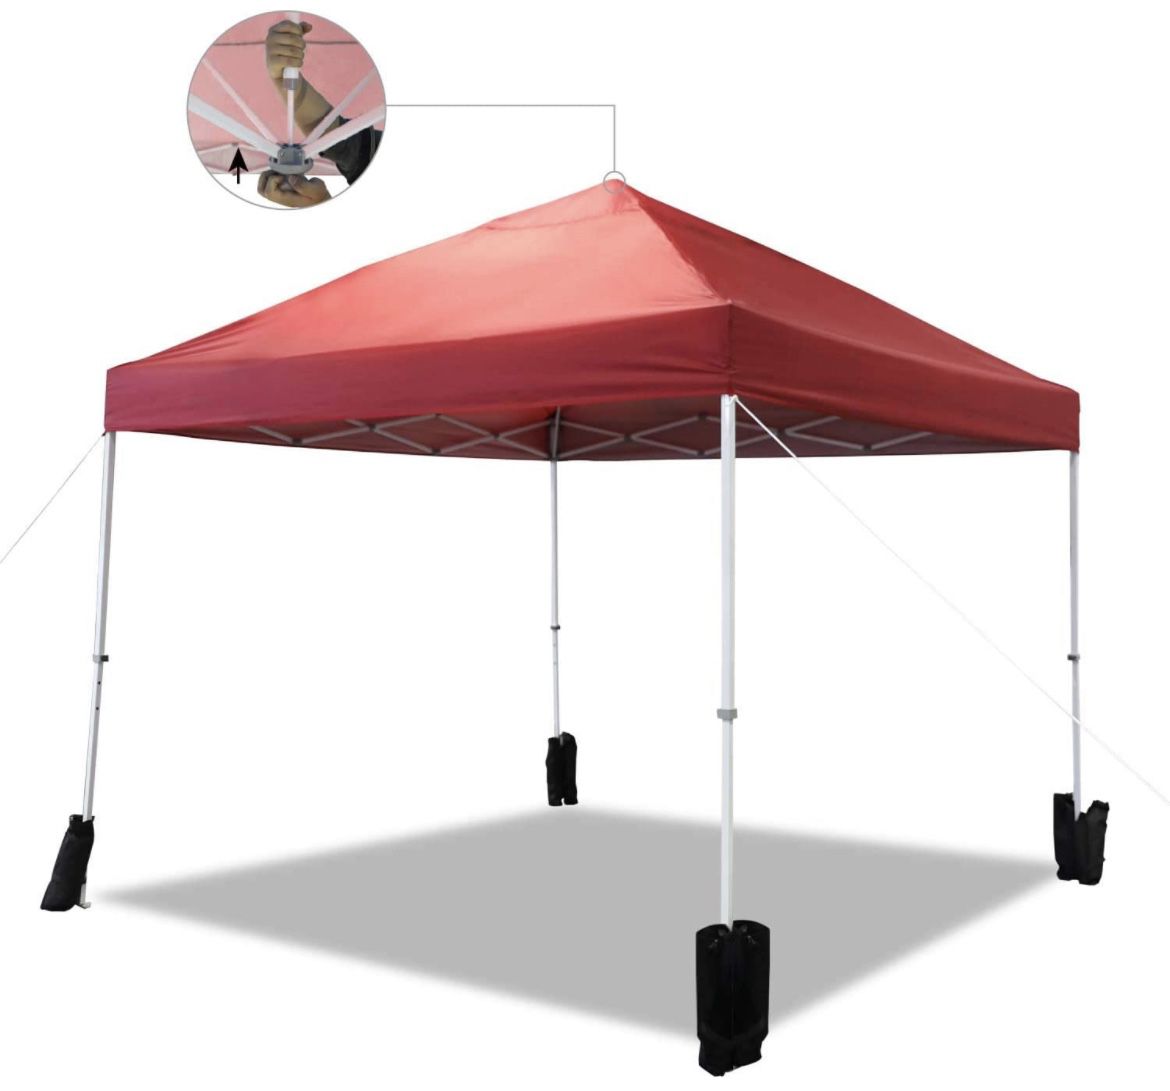 Amazon Basics Outdoor One-push Pop Up Canopy, 10ft x 10ft with Wheeled Carry, 4-pk weight bag, Red